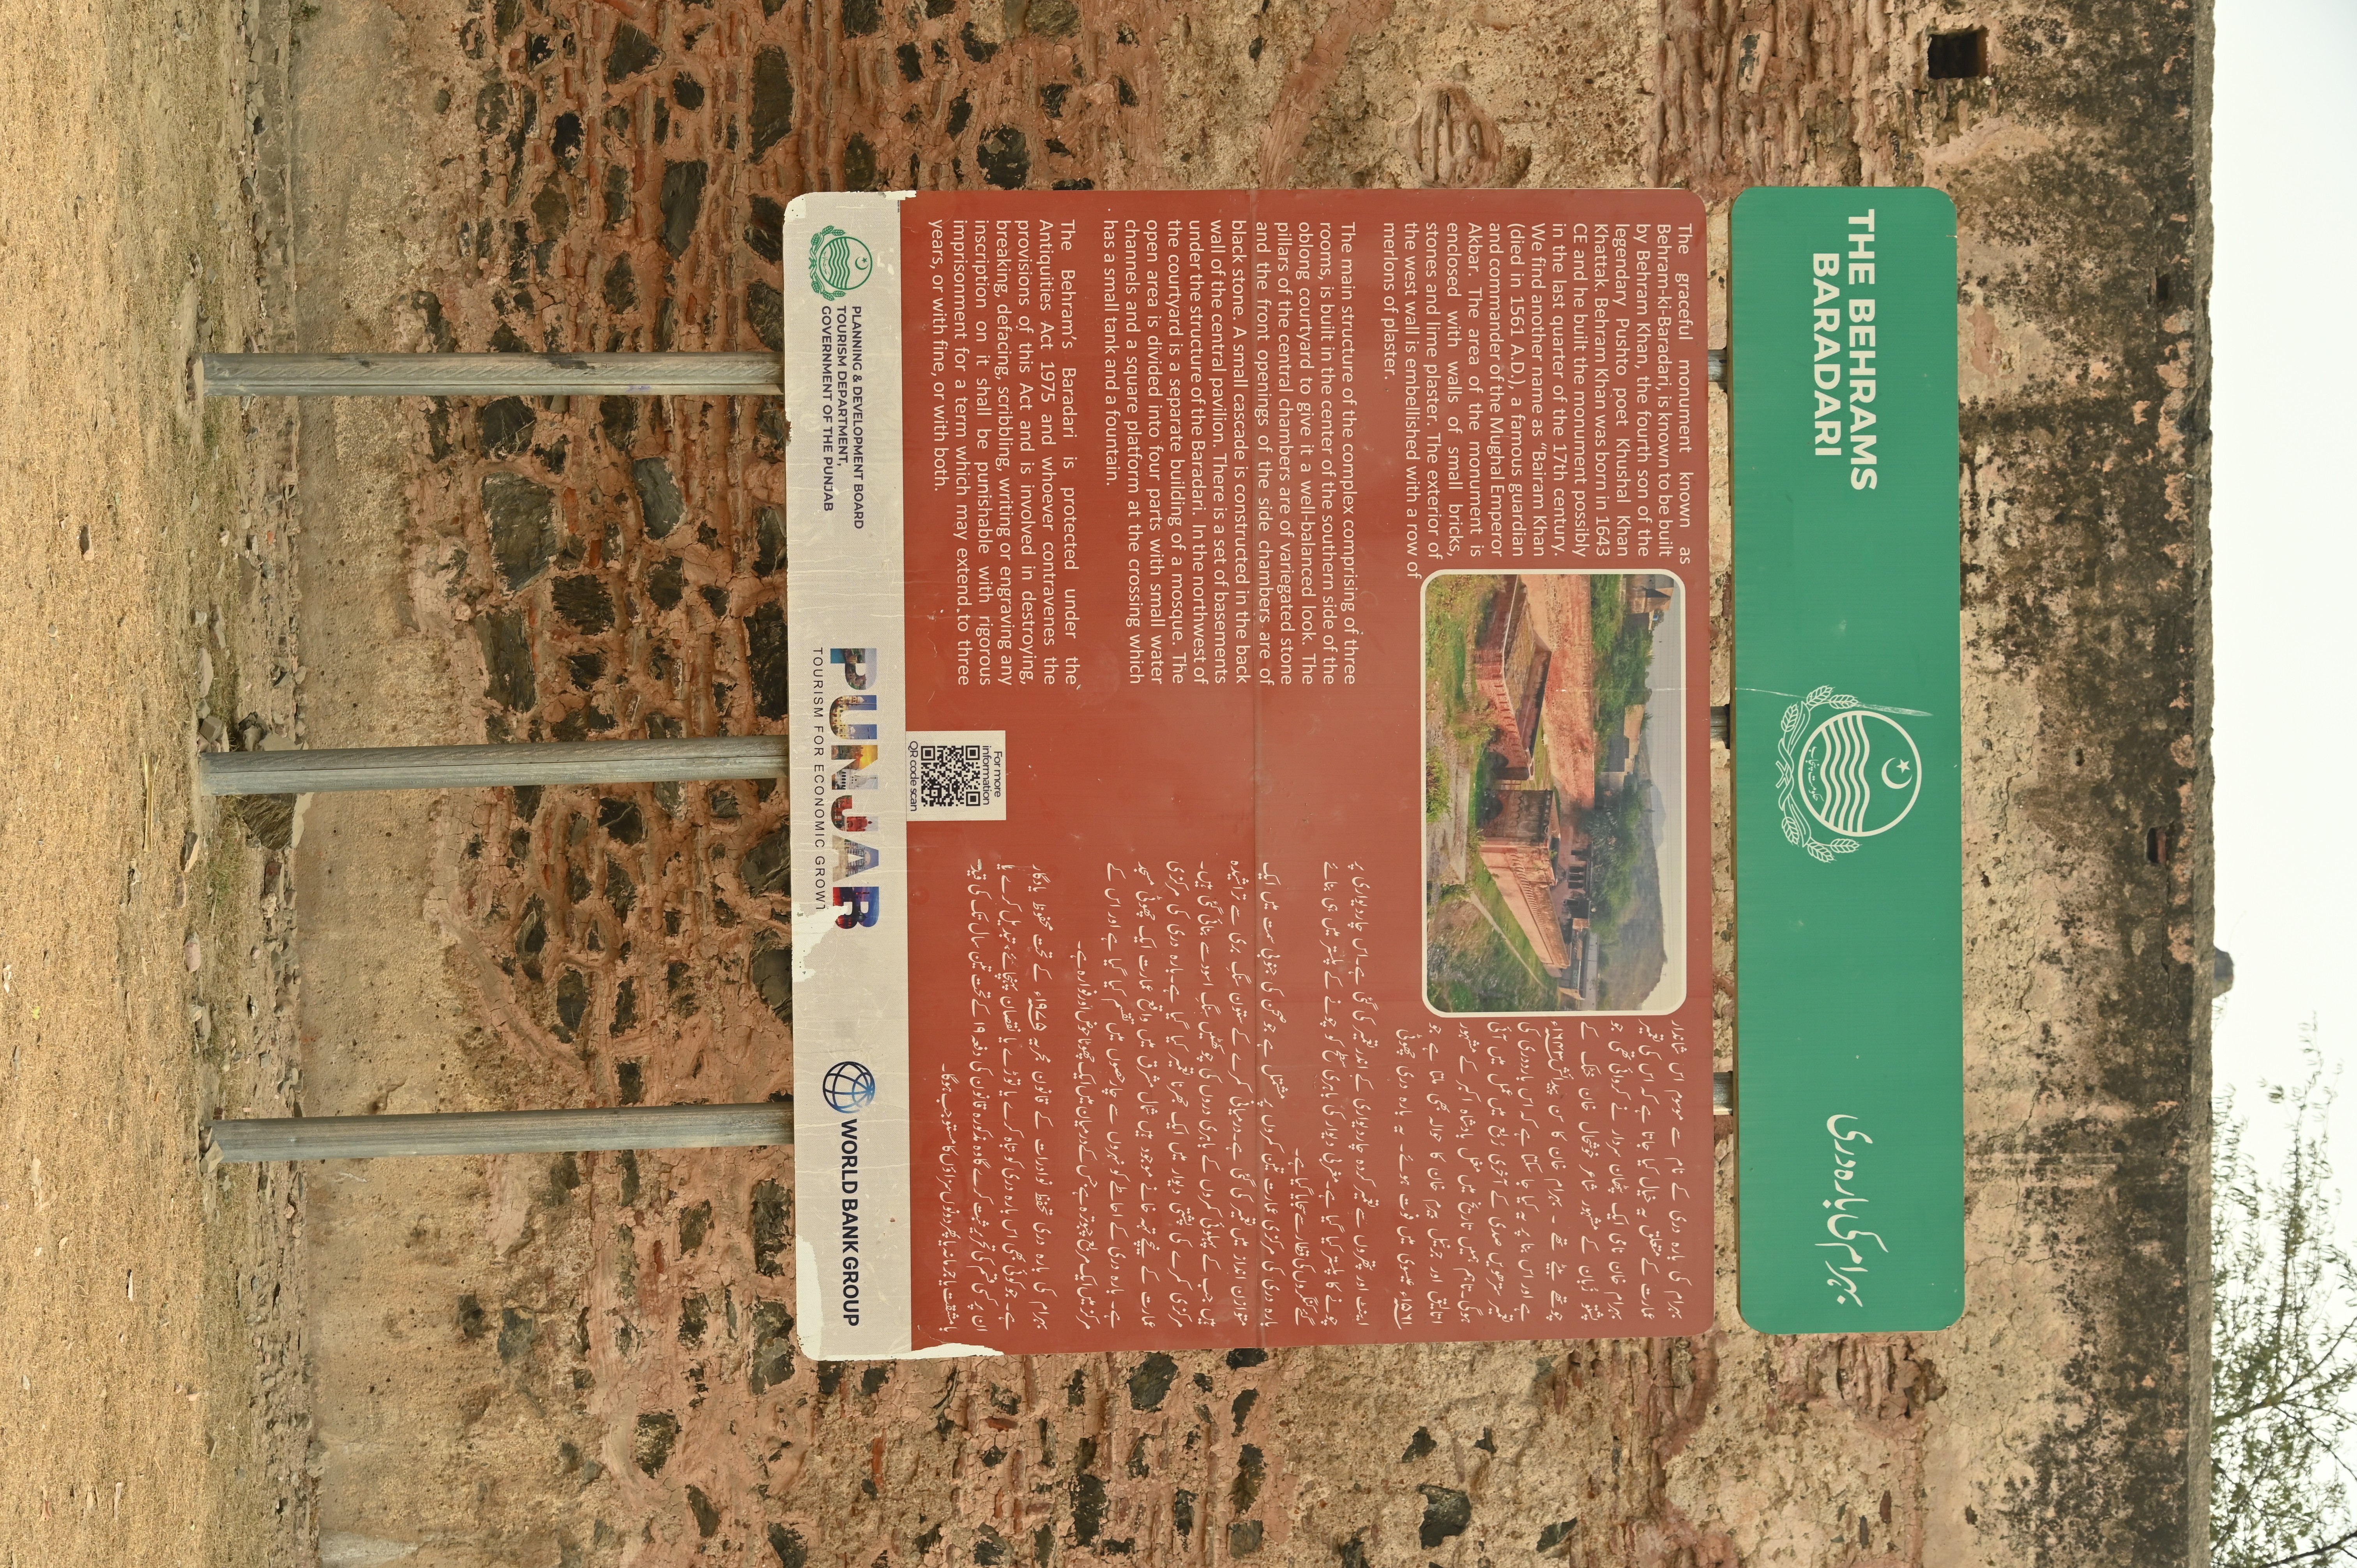 The information board explaining the historical structure and the constructional style of the archaeological site named "Behram ki Baradari"